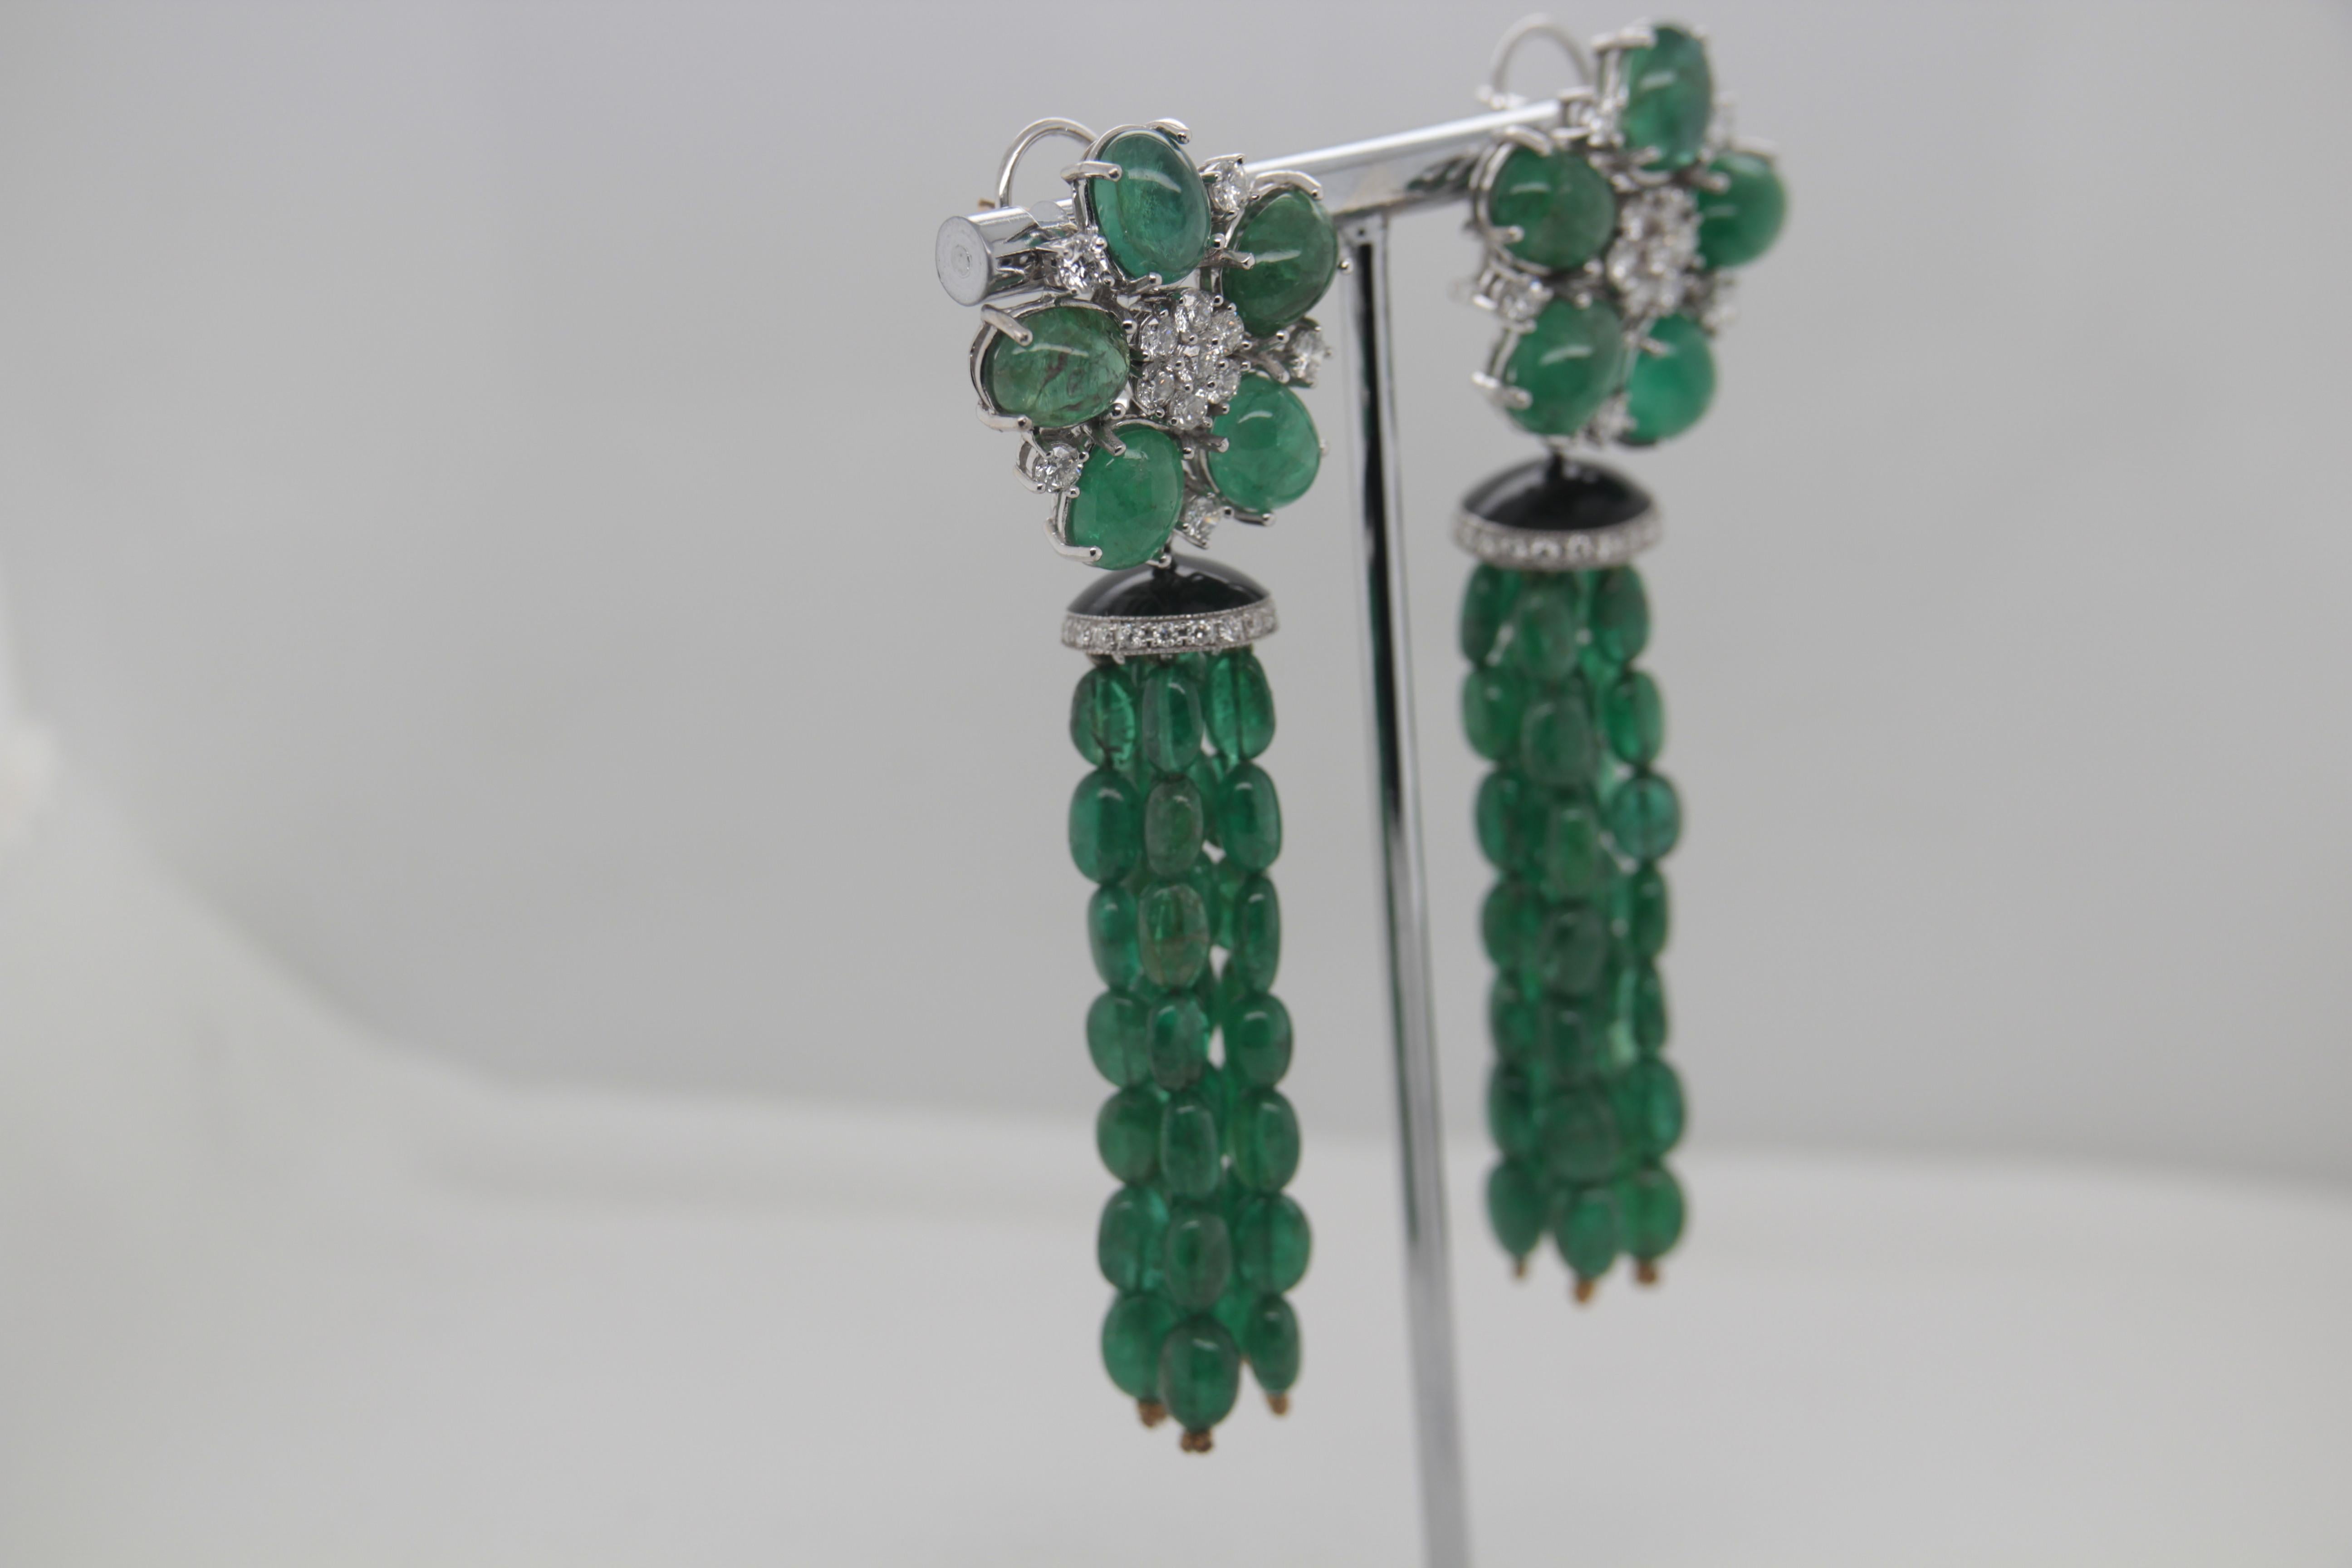 A brand new emerald and diamond earring in 18 karat gold. Emerald weight is 98.90 carat and diamond weight is 2.61 carat. Total earring weight is 37.90 grams.